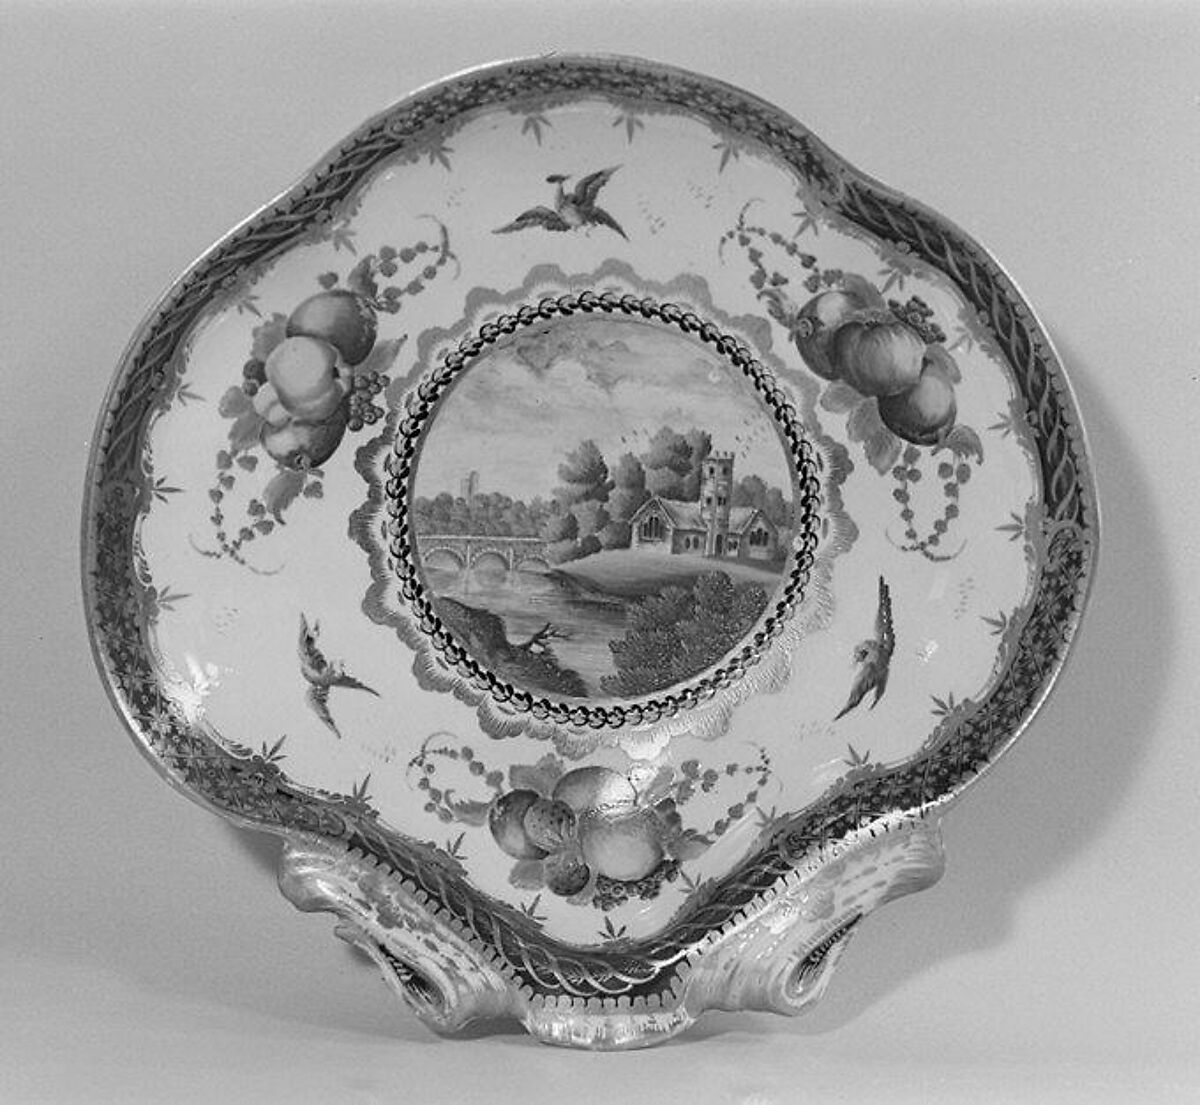 Dish (one of a pair), Worcester factory (British, 1751–2008), Soft-paste porcelain, British, Worcester 